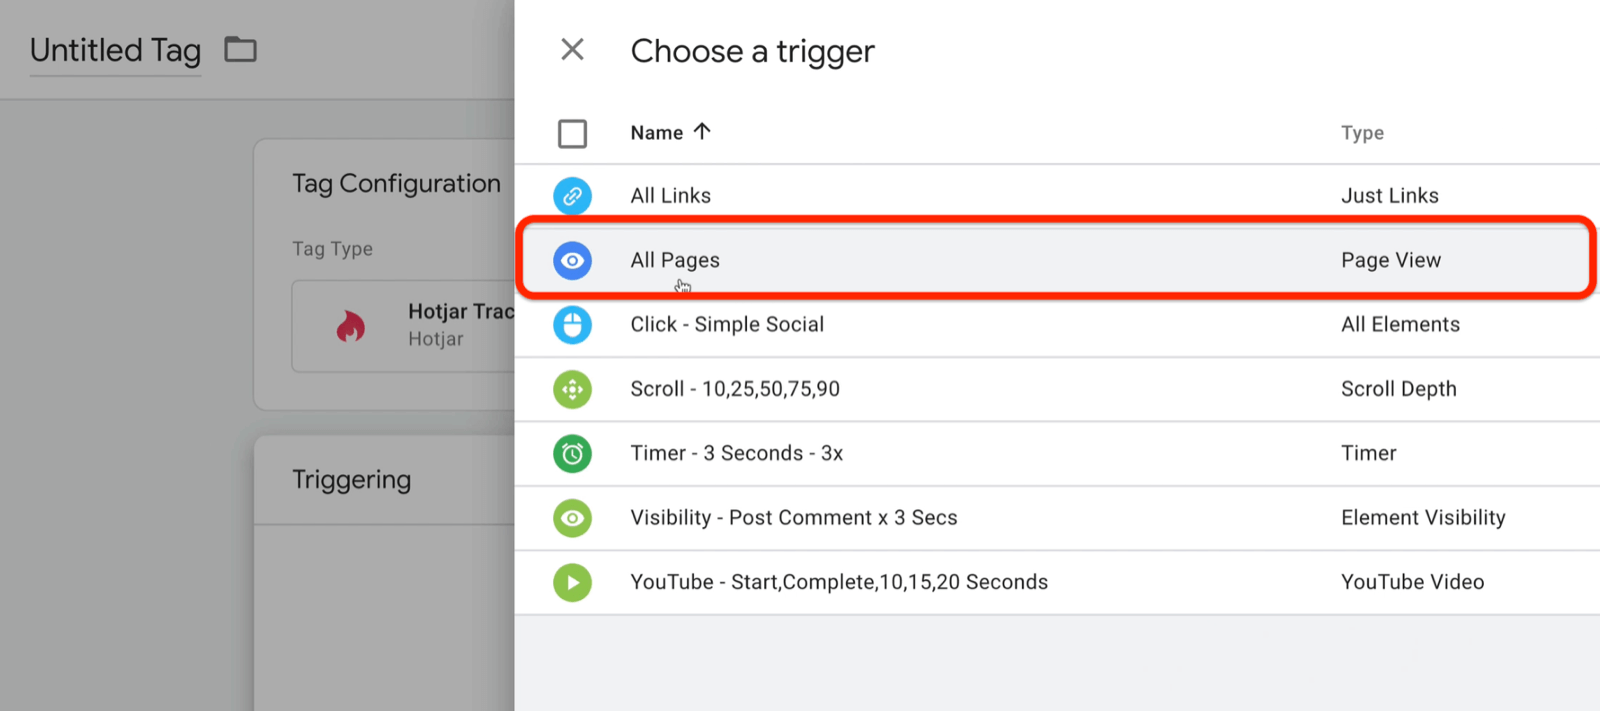 new google tag manager tag with choose a trigger menu options with several noted, including click - simple social, scroll - 10,25,50,75,90, time - 3 seconds - 3x, among others with all pages selected